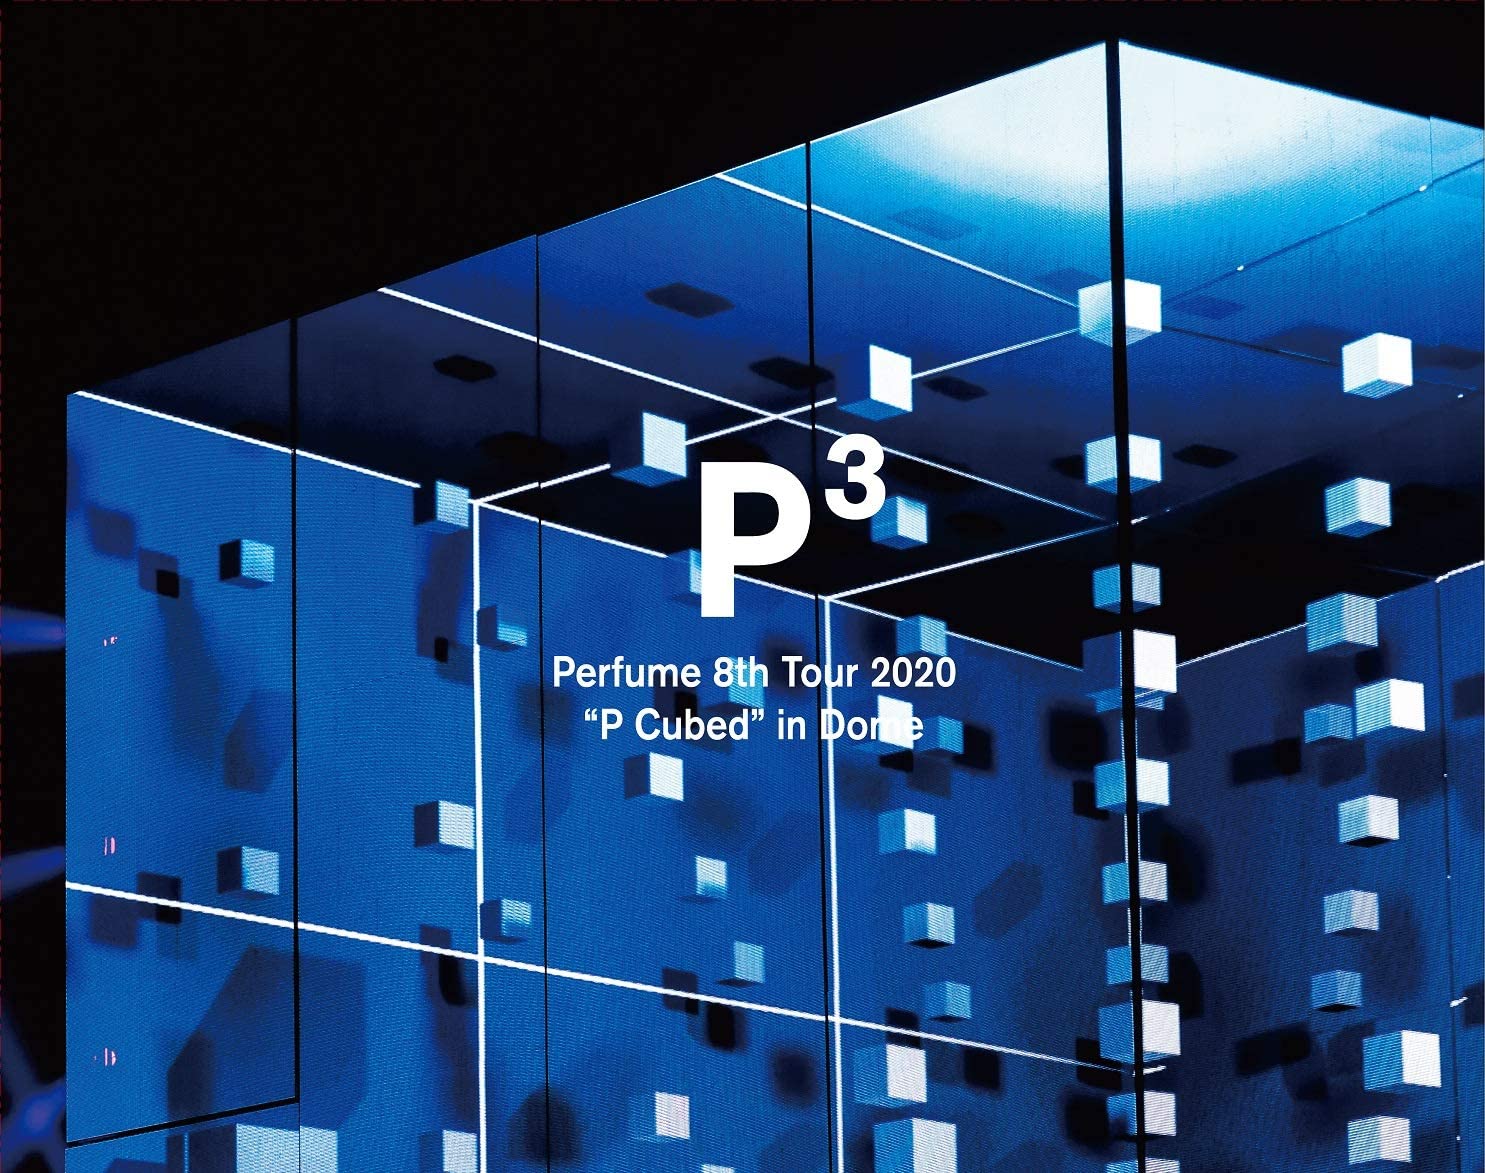 Perfume - Perfume 8th Tour 2020 "P Cubed" in Dome (2020) [Blu-ray ISO + MP4 1080p]